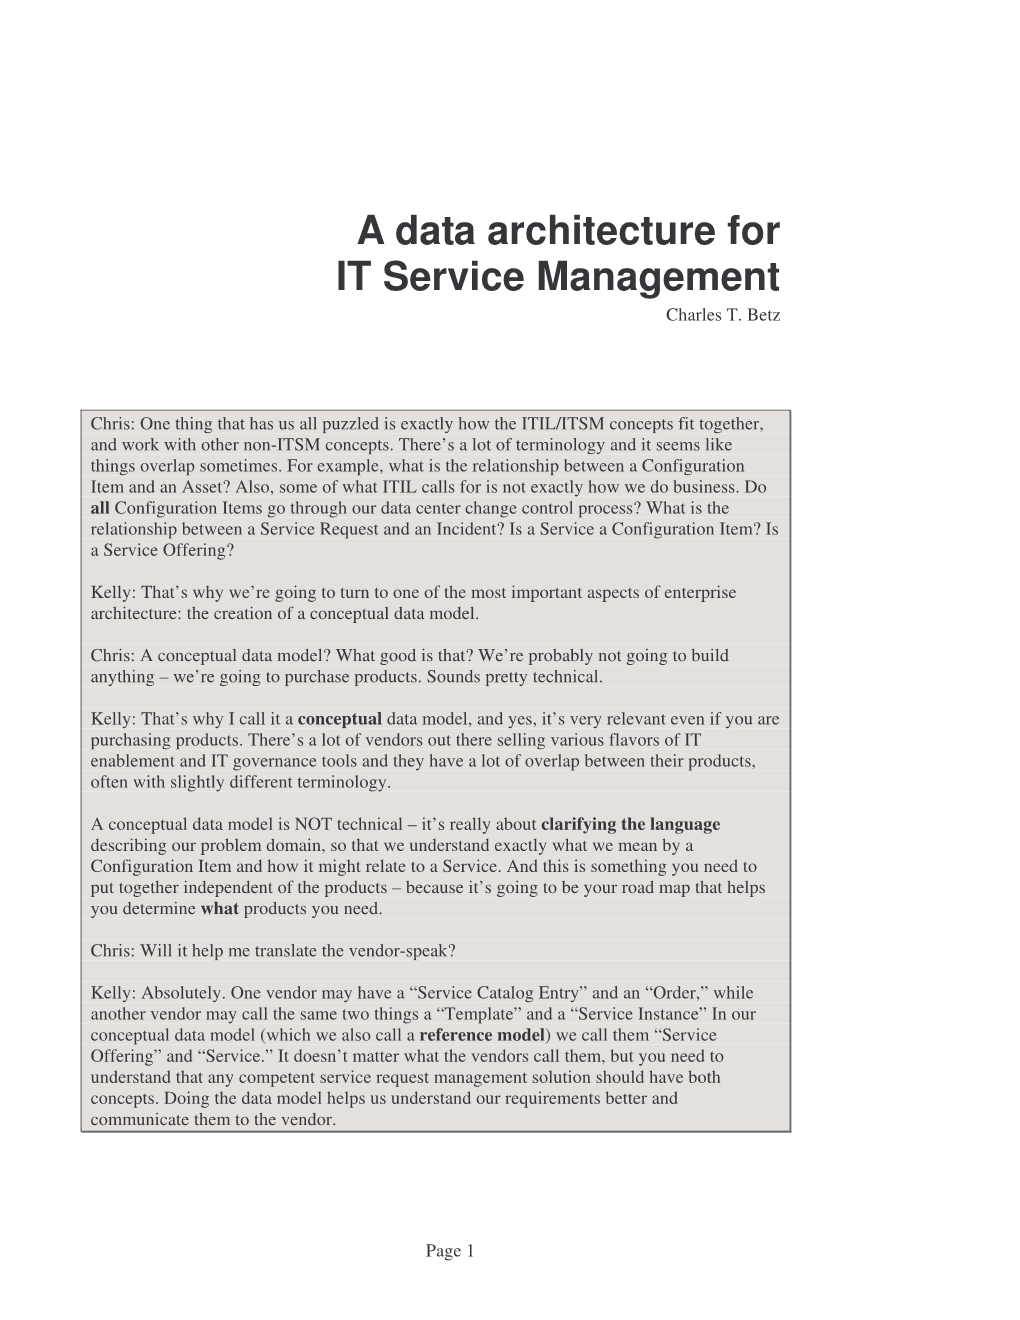 A Data Architecture for IT Service Management Charles T